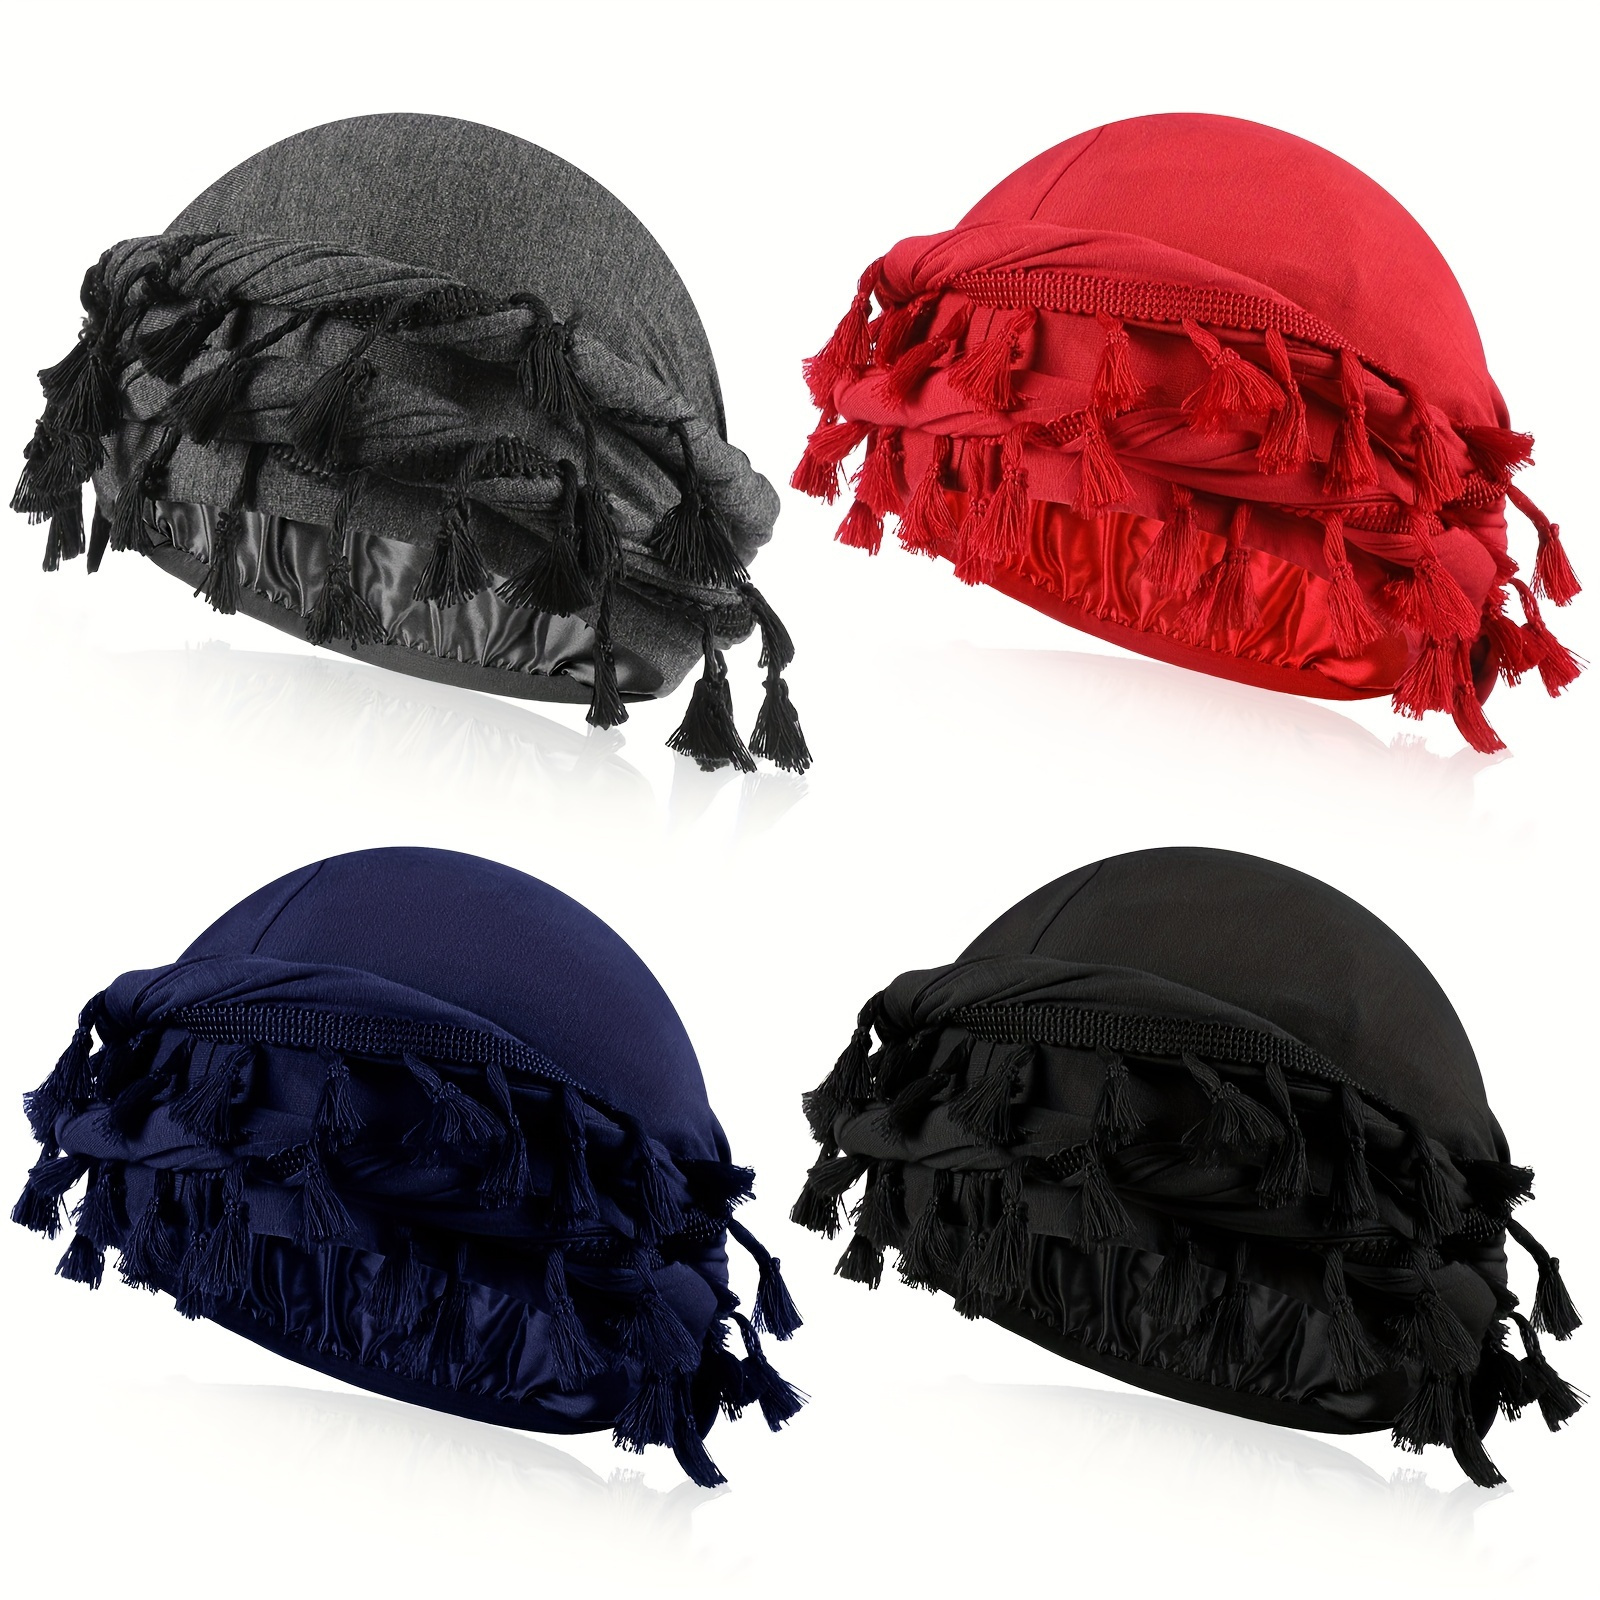 

4pcs Retro Twist Head Wraps, Satin Lined Turban With Tassels, For Cycling Sports For Women Men